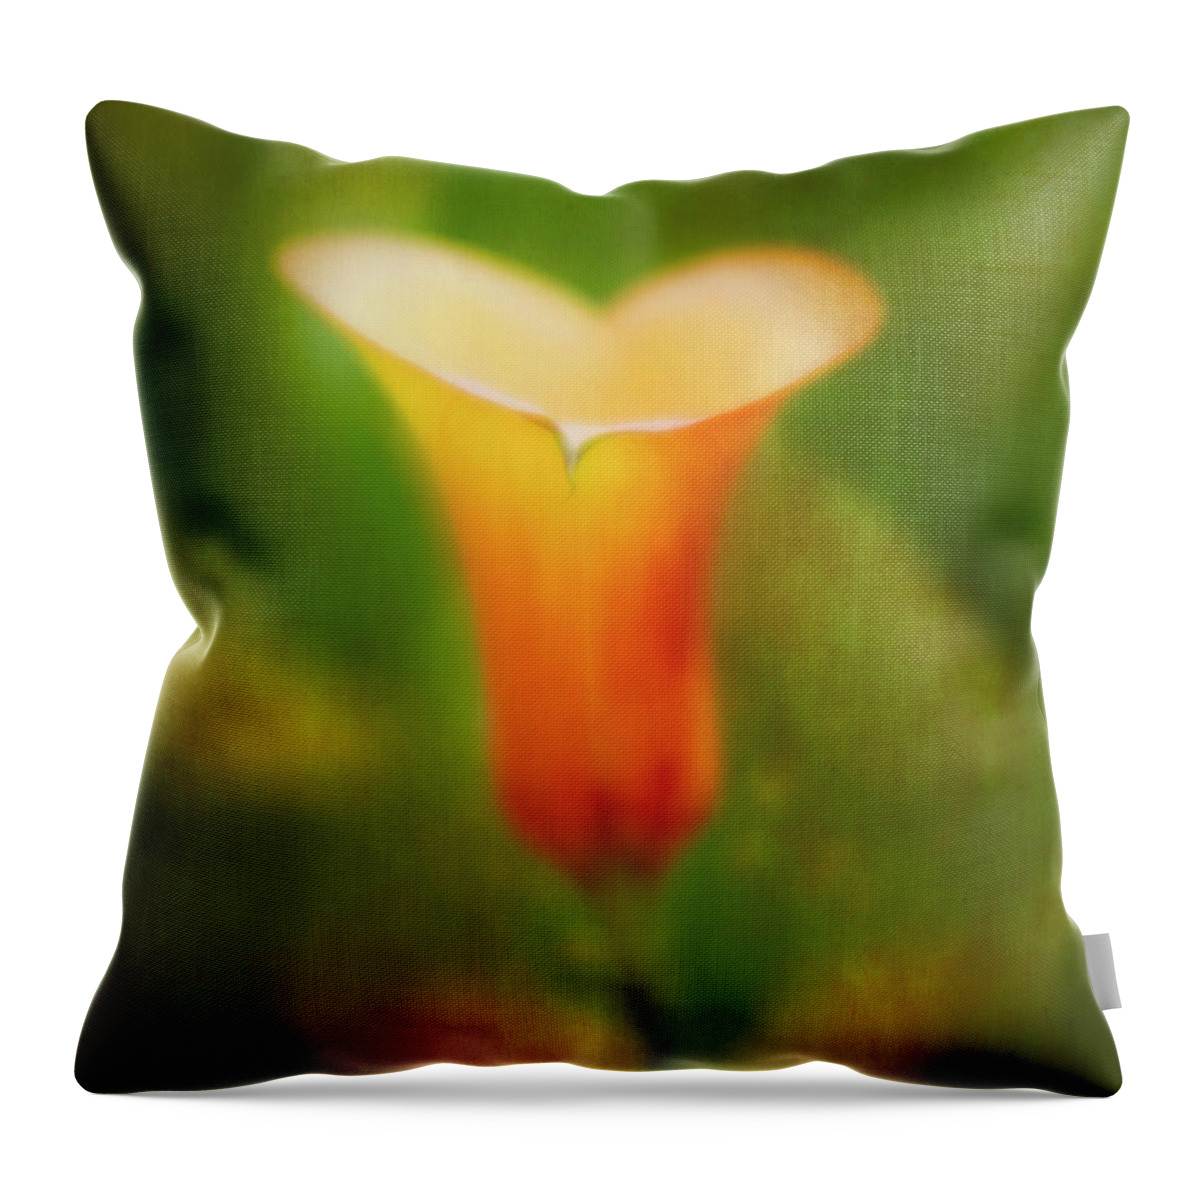 Calla Lily Throw Pillow featuring the photograph Offering. by Usha Peddamatham